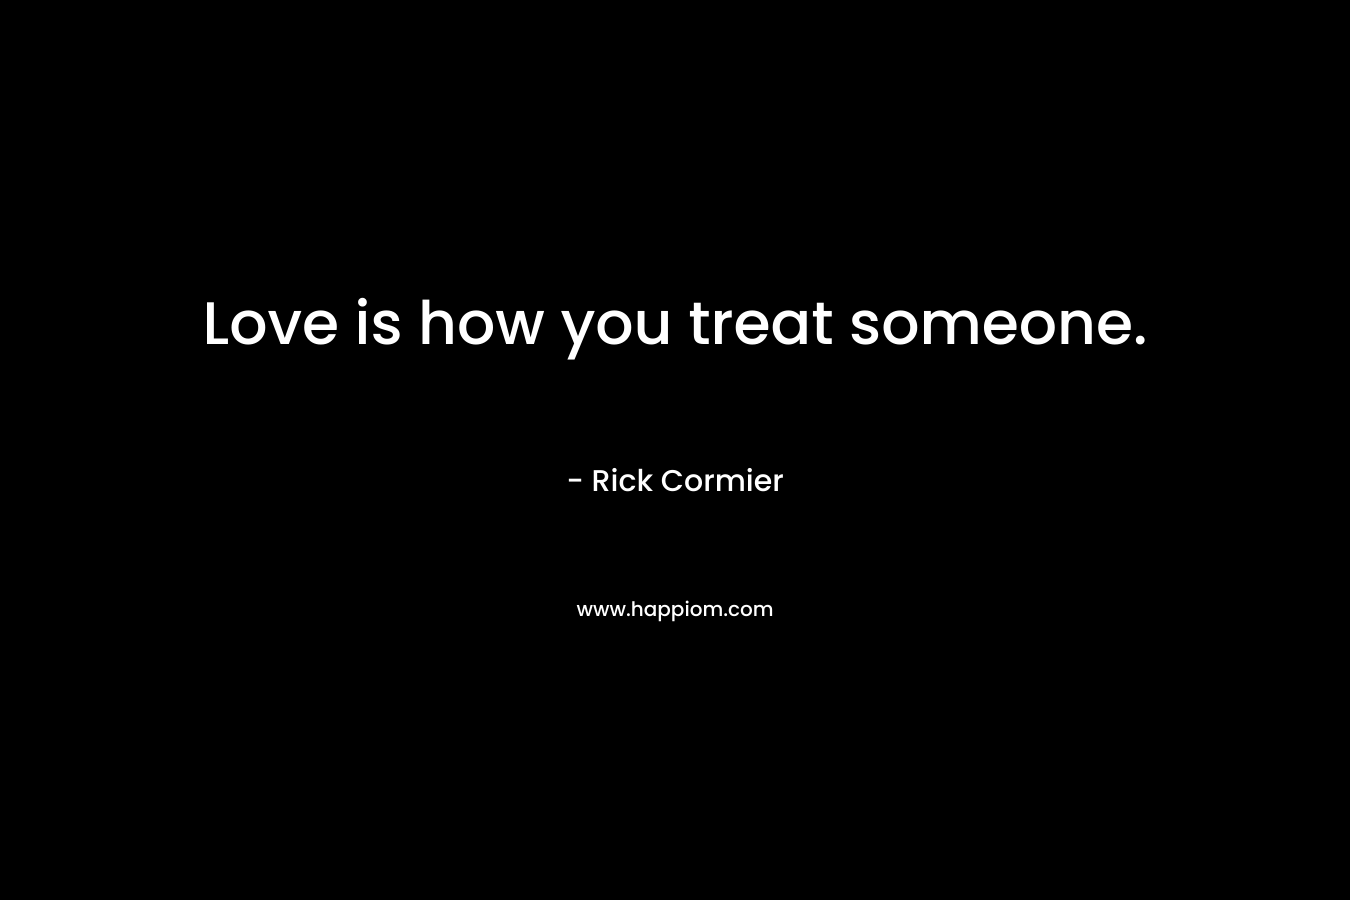 Love is how you treat someone.